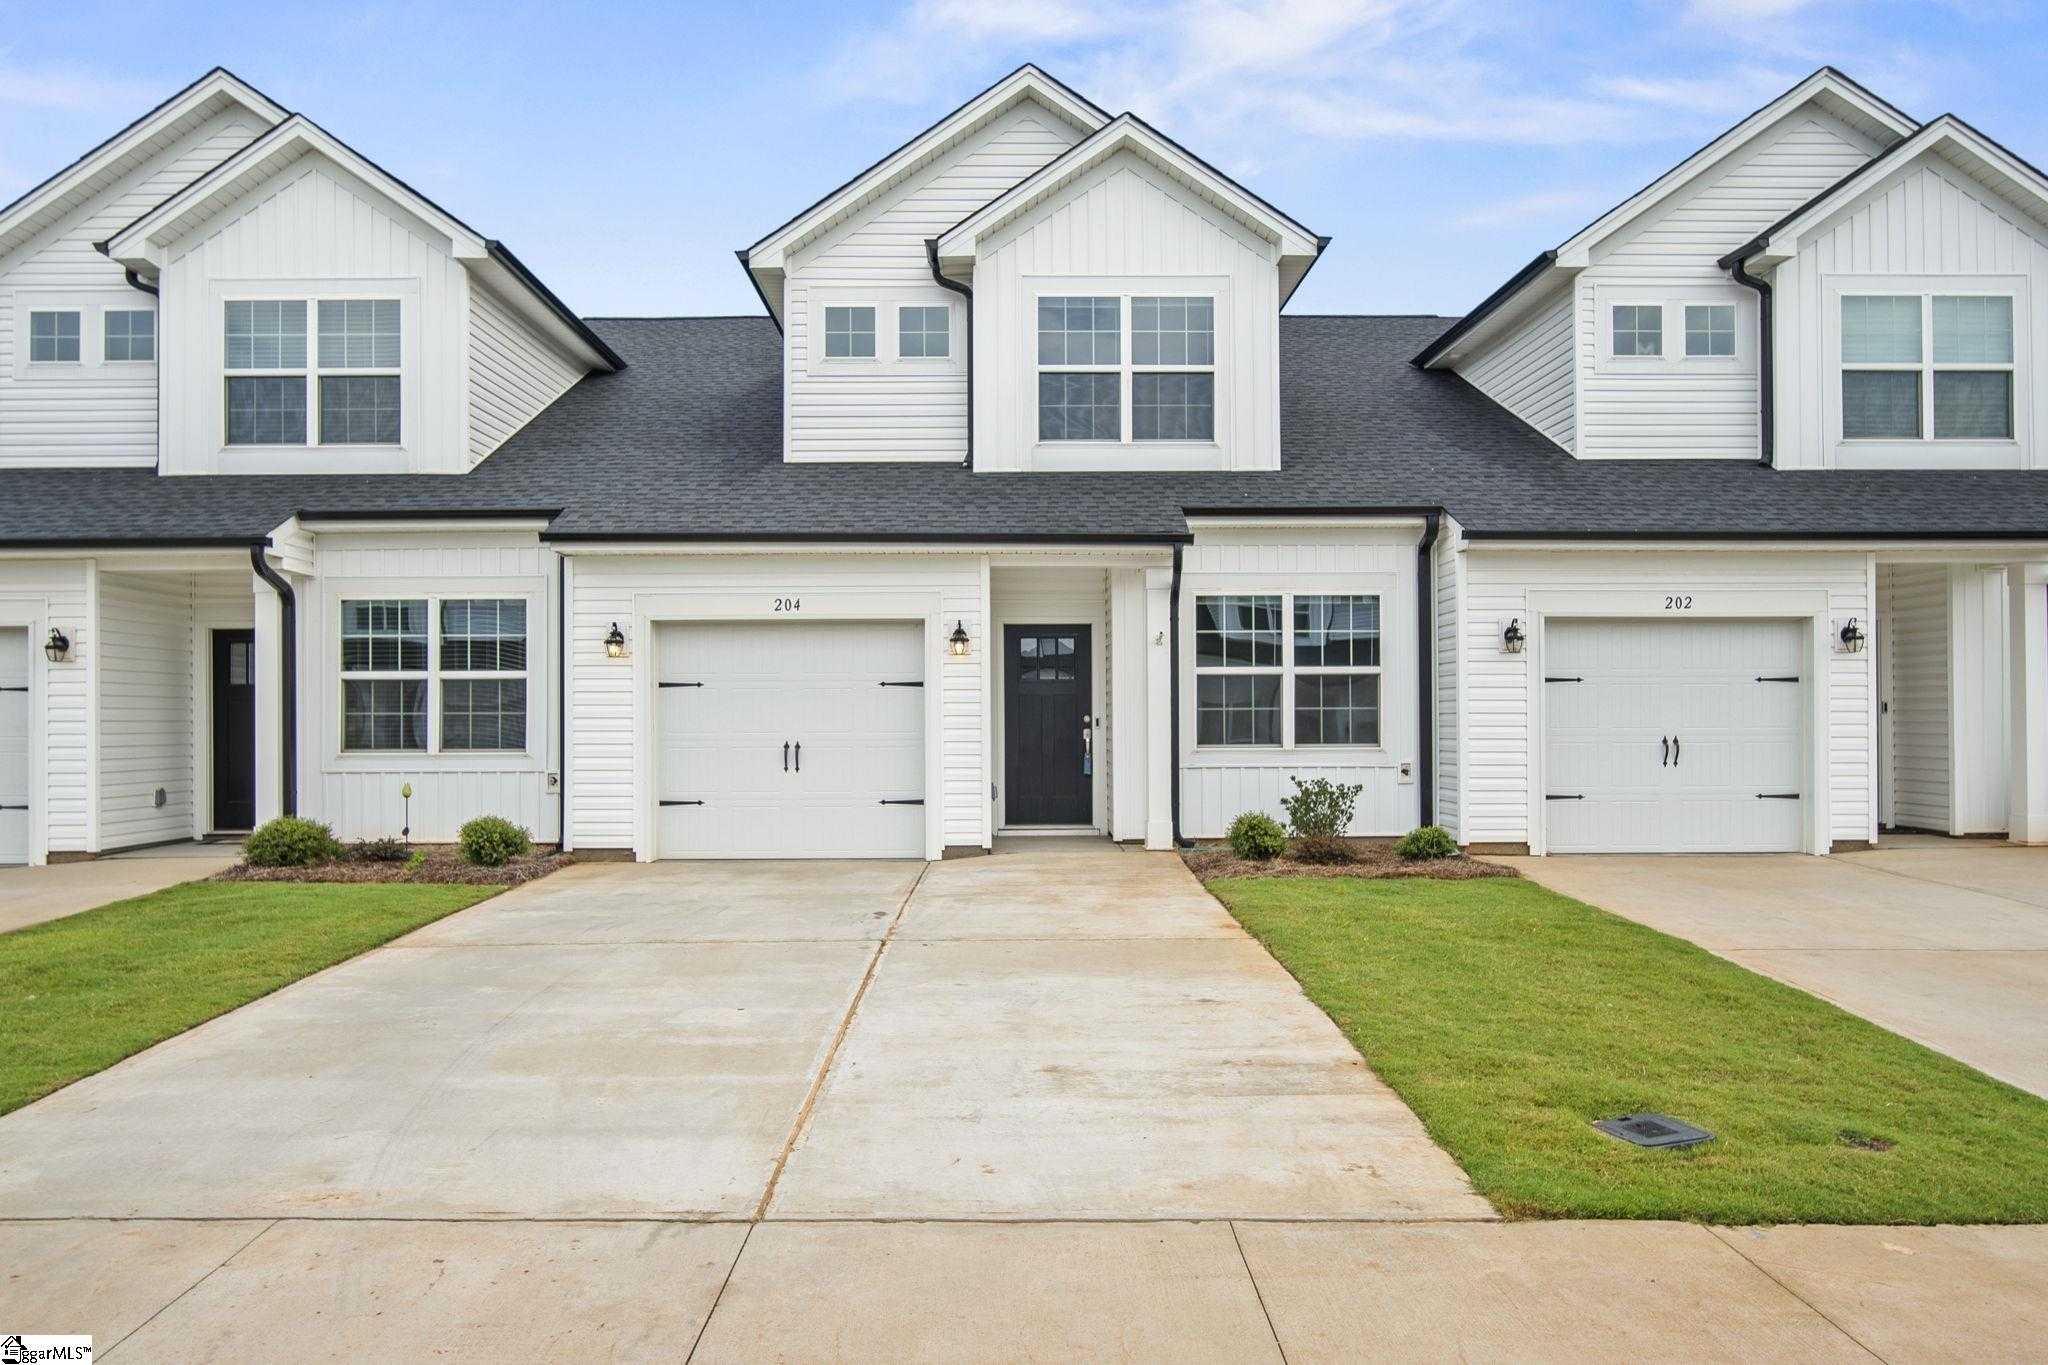 View Greer, SC 29651 townhome